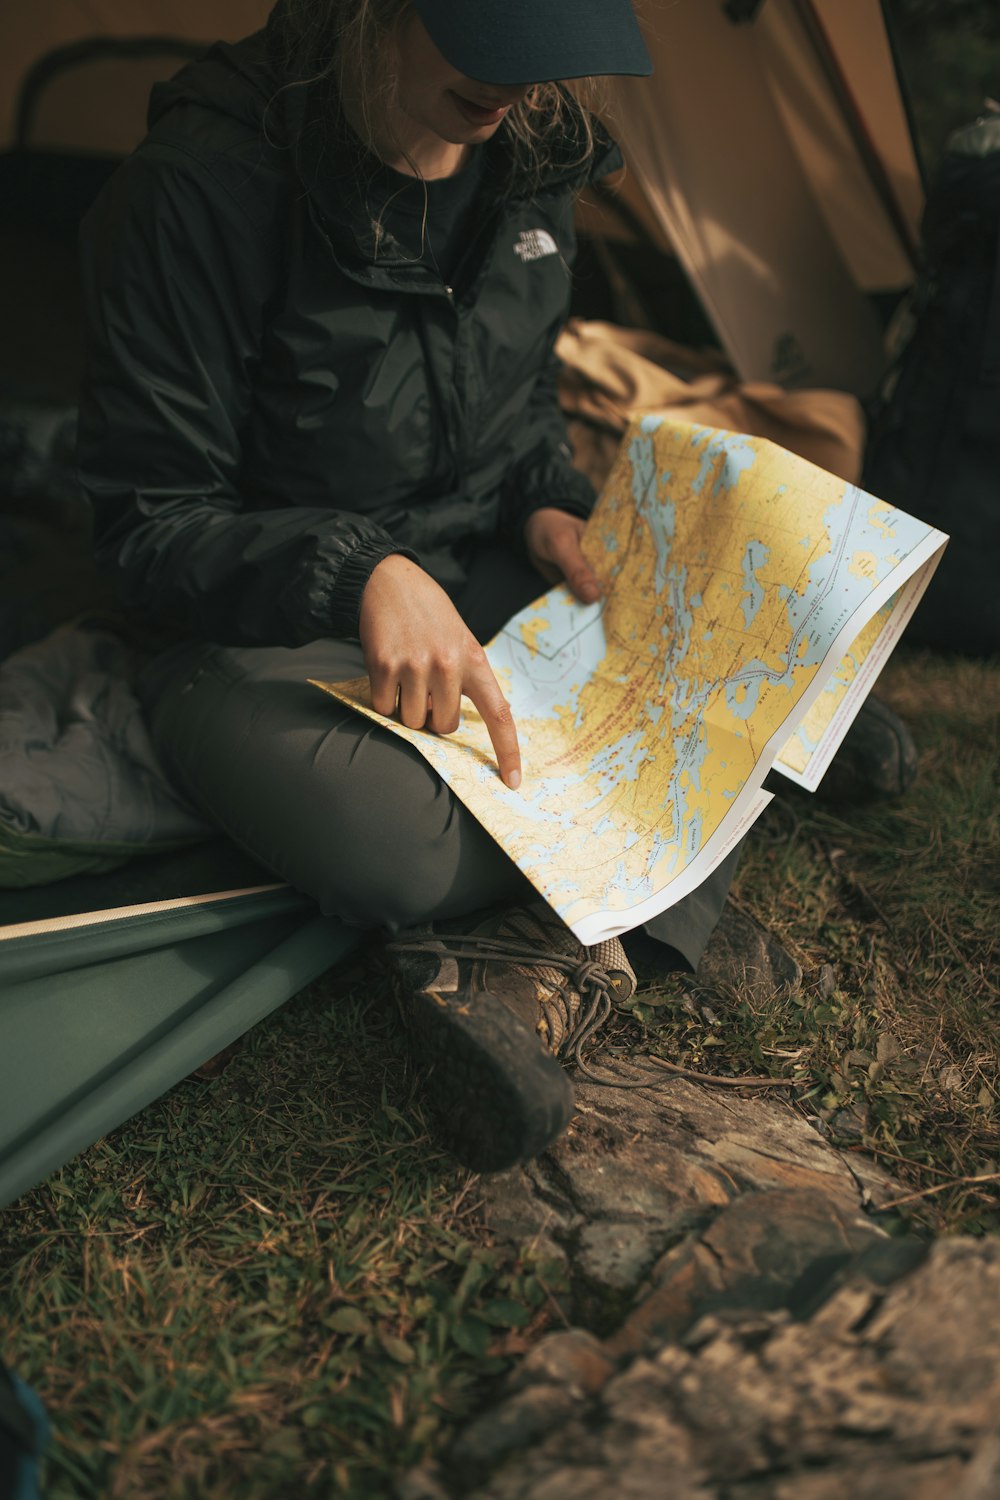 Person wearing the north face jacket sitting on sofa while holding map  photo – Free Human Image on Unsplash